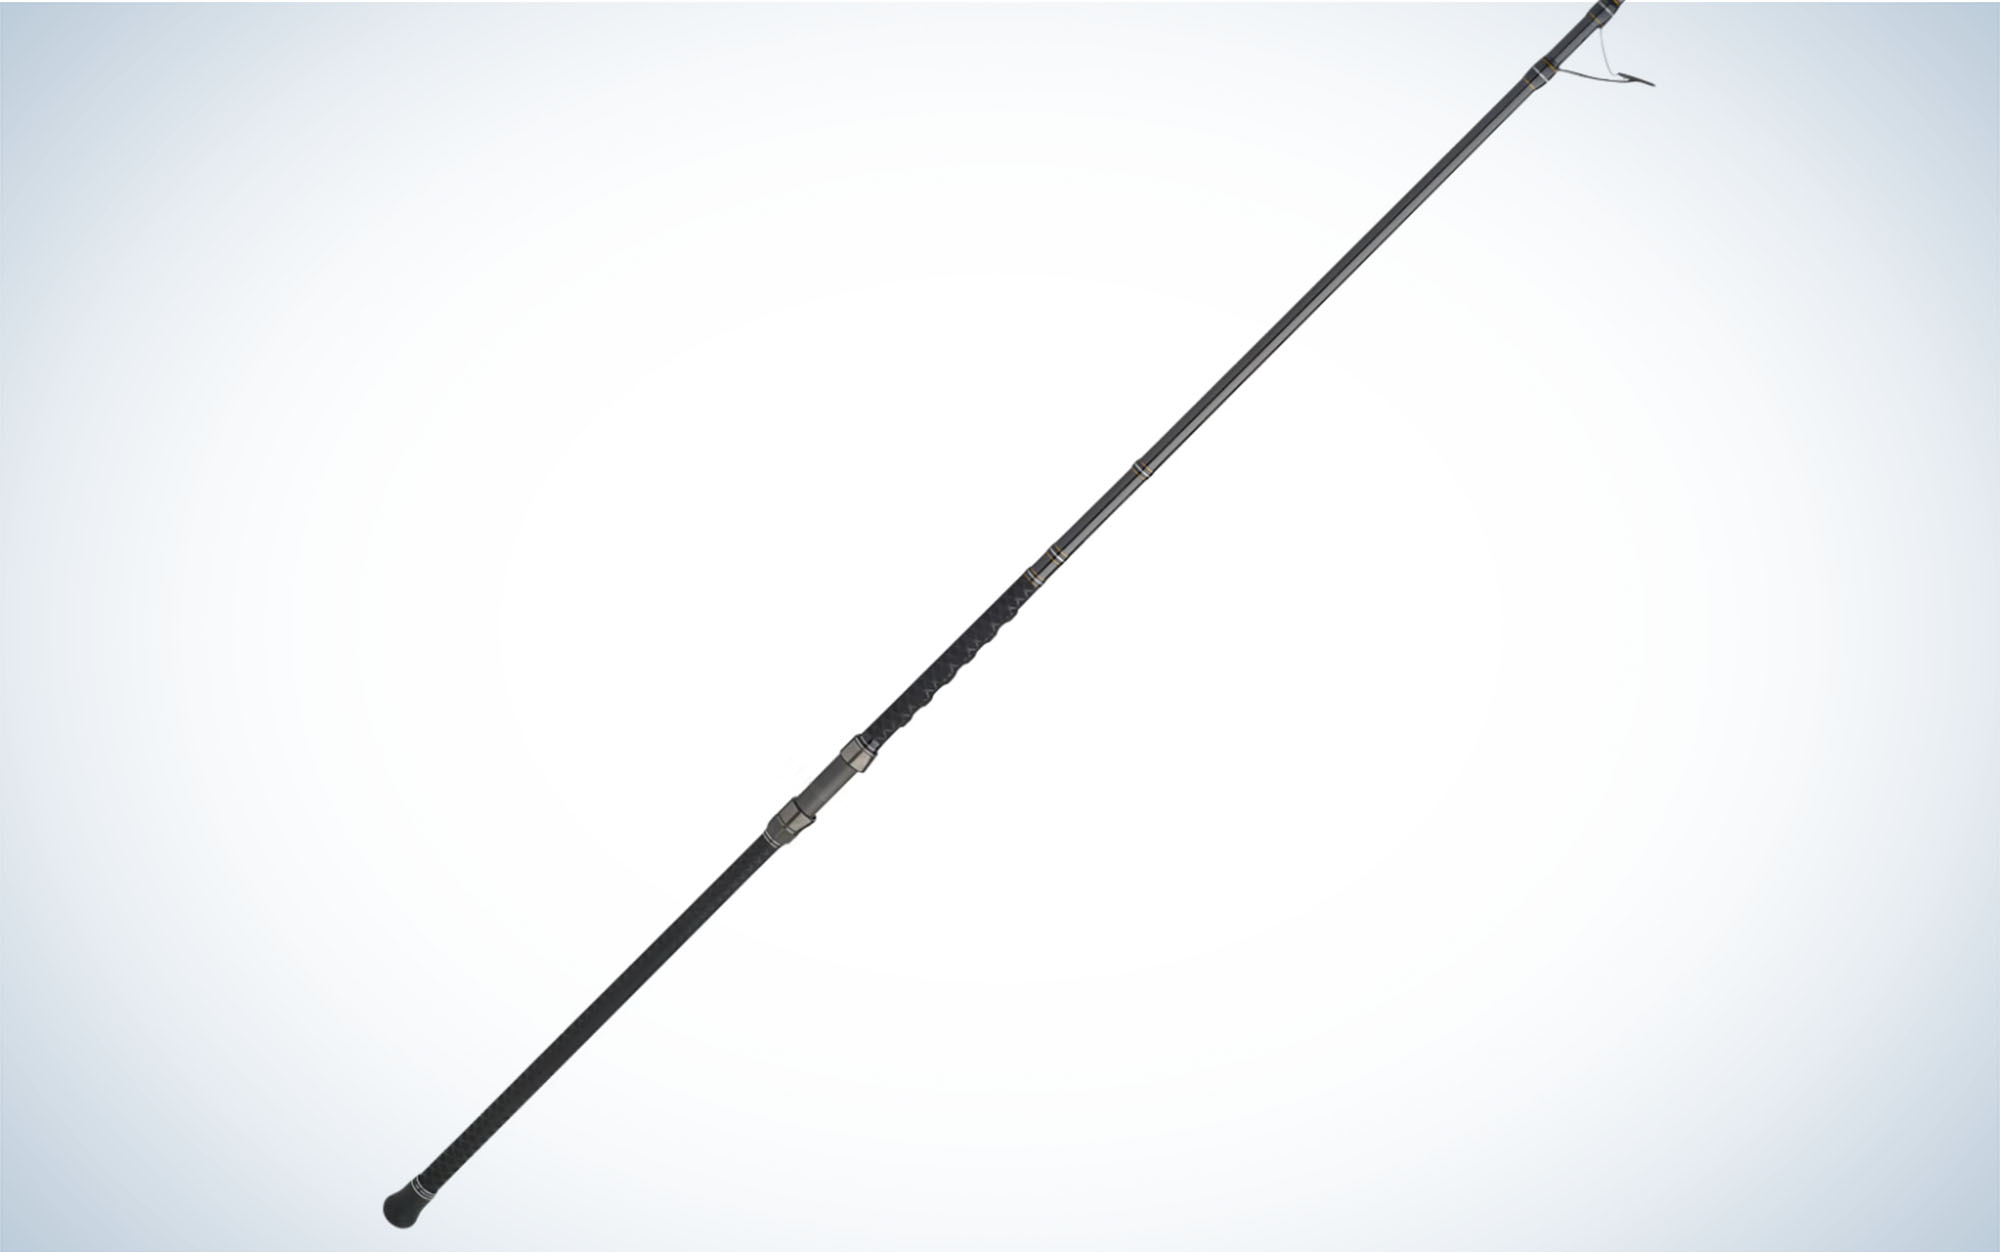 SURF FISHING ROD goes over 100 YARDS Easily! 